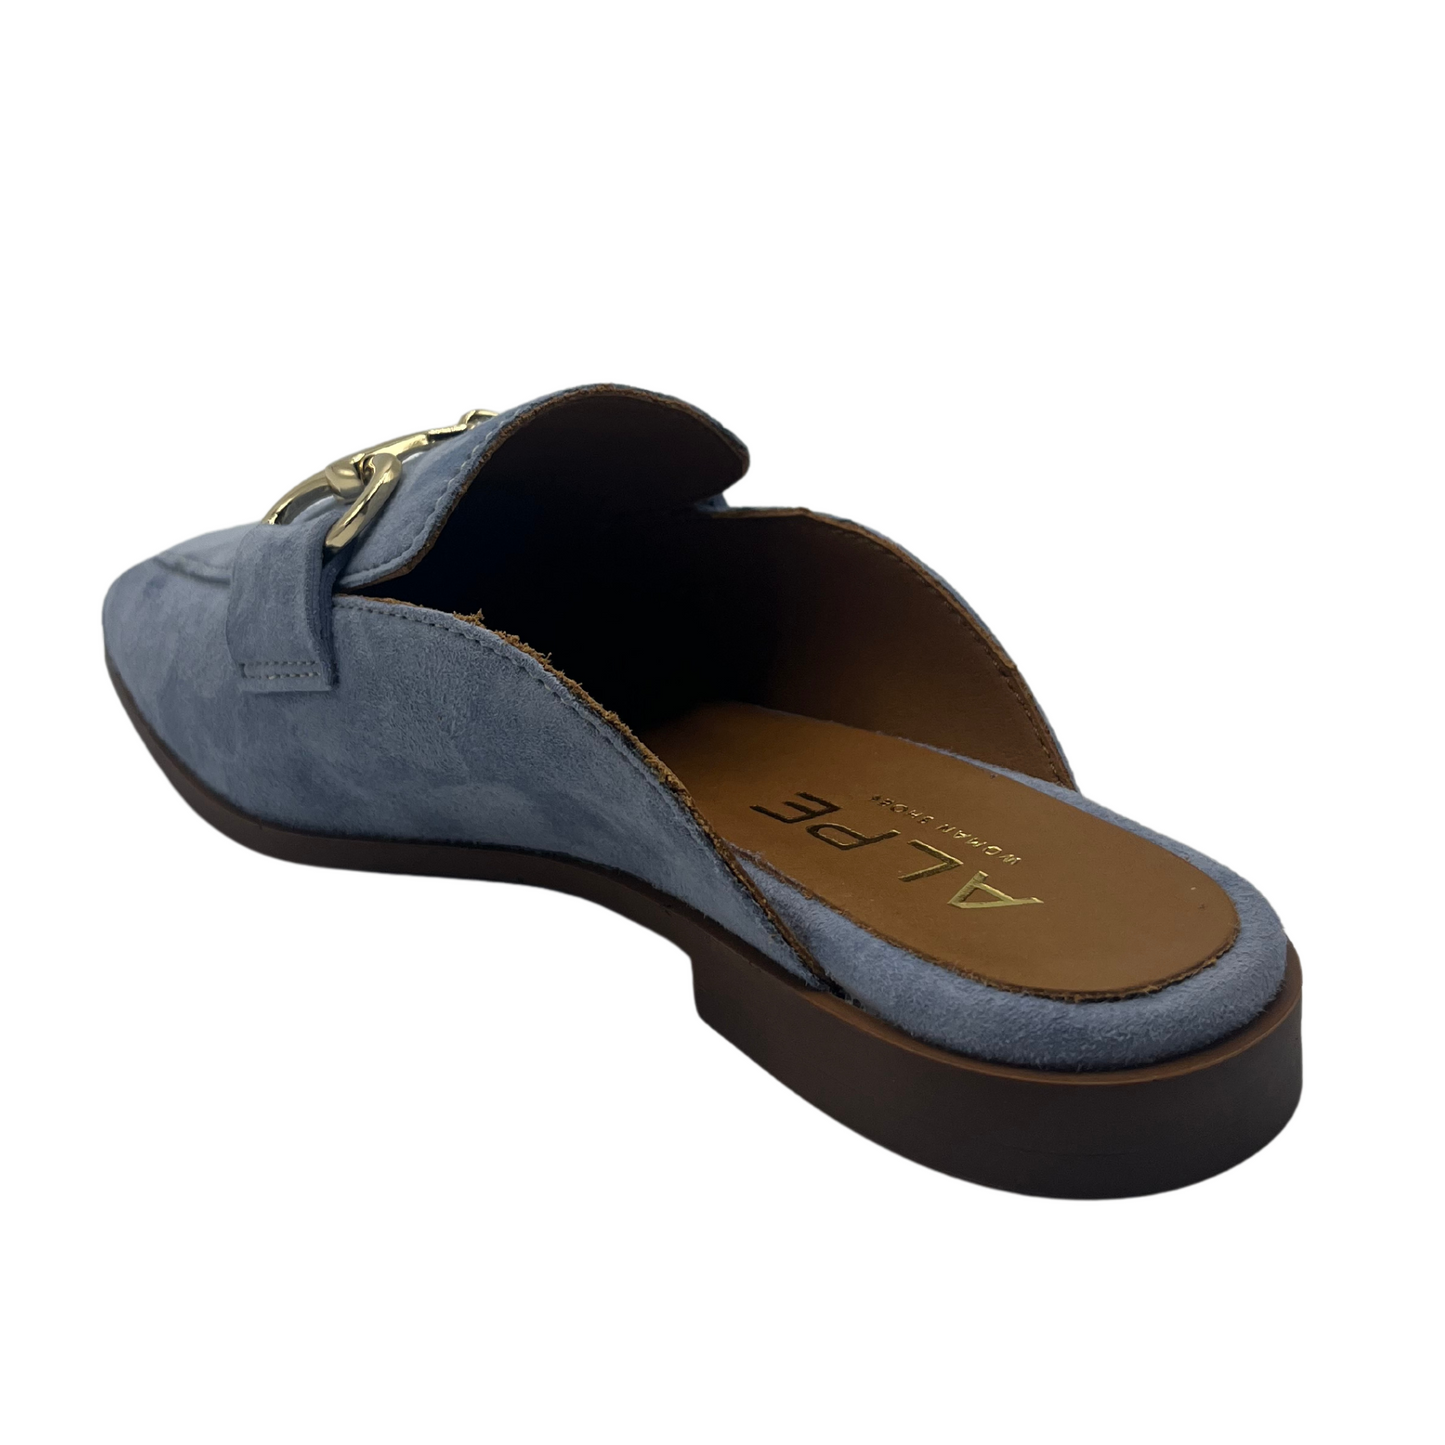 Back facing view of blue leather slip on loafer with low heel and gold bit detail on upper